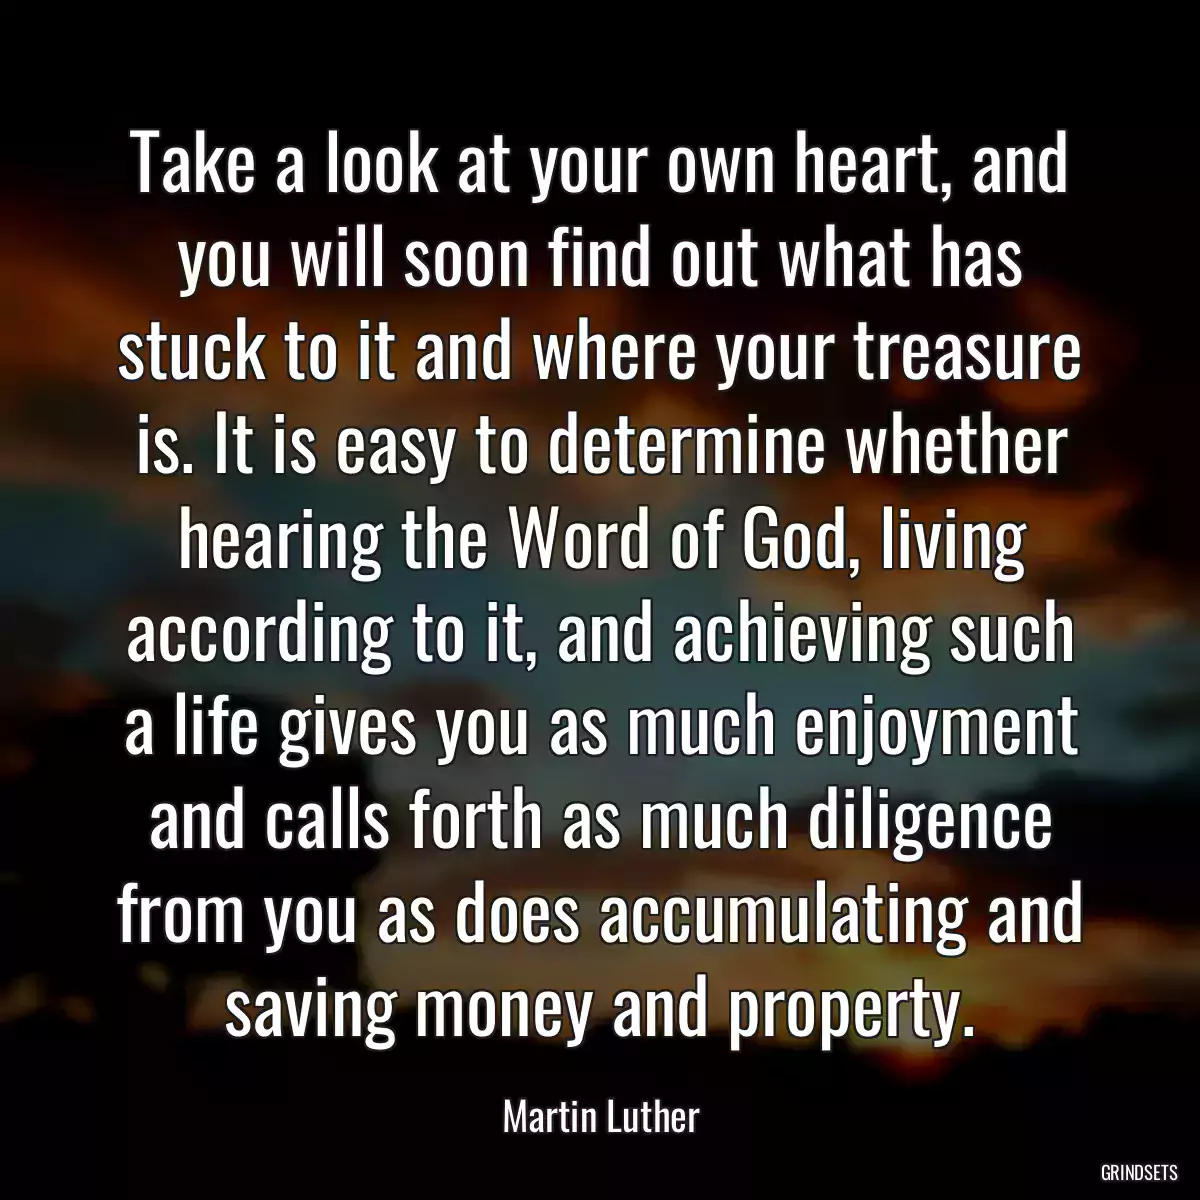 Take a look at your own heart, and you will soon find out what has stuck to it and where your treasure is. It is easy to determine whether hearing the Word of God, living according to it, and achieving such a life gives you as much enjoyment and calls forth as much diligence from you as does accumulating and saving money and property.